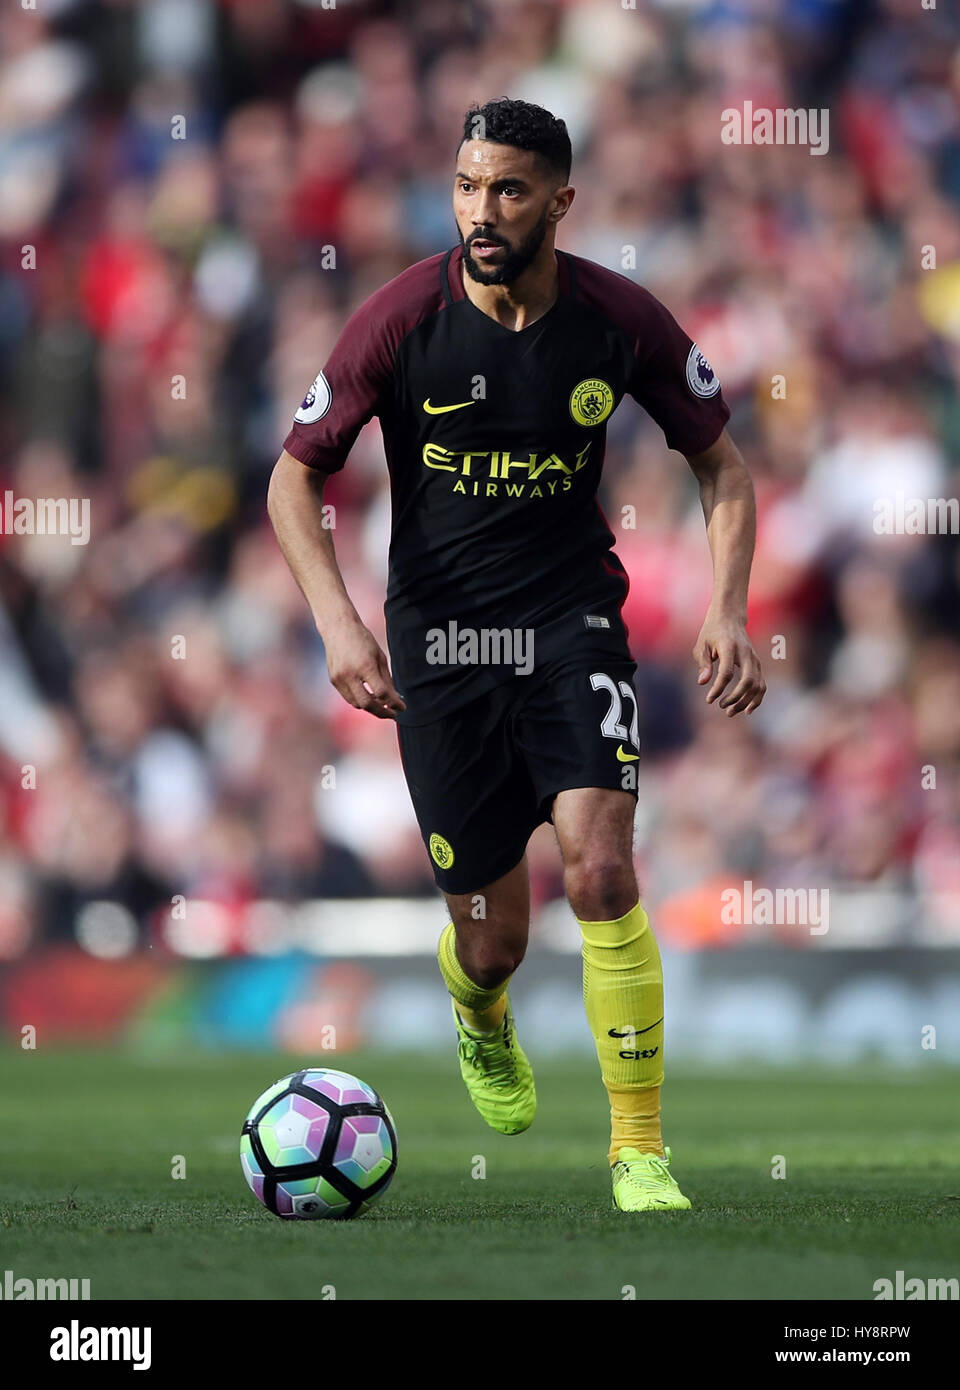 Manchester City's Gael Clichy during the Premier League match at the Emirates Stadium, London. PRESS ASSOCIATION Photo. Picture date: Sunday April 2, 2017. See PA story SOCCER Arsenal. Photo credit should read: Nick Potts/PA Wire. RESTRICTIONS: No use with unauthorised audio, video, data, fixture lists, club/league logos or 'live' services. Online in-match use limited to 75 images, no video emulation. No use in betting, games or single club/league/player publications. Stock Photo